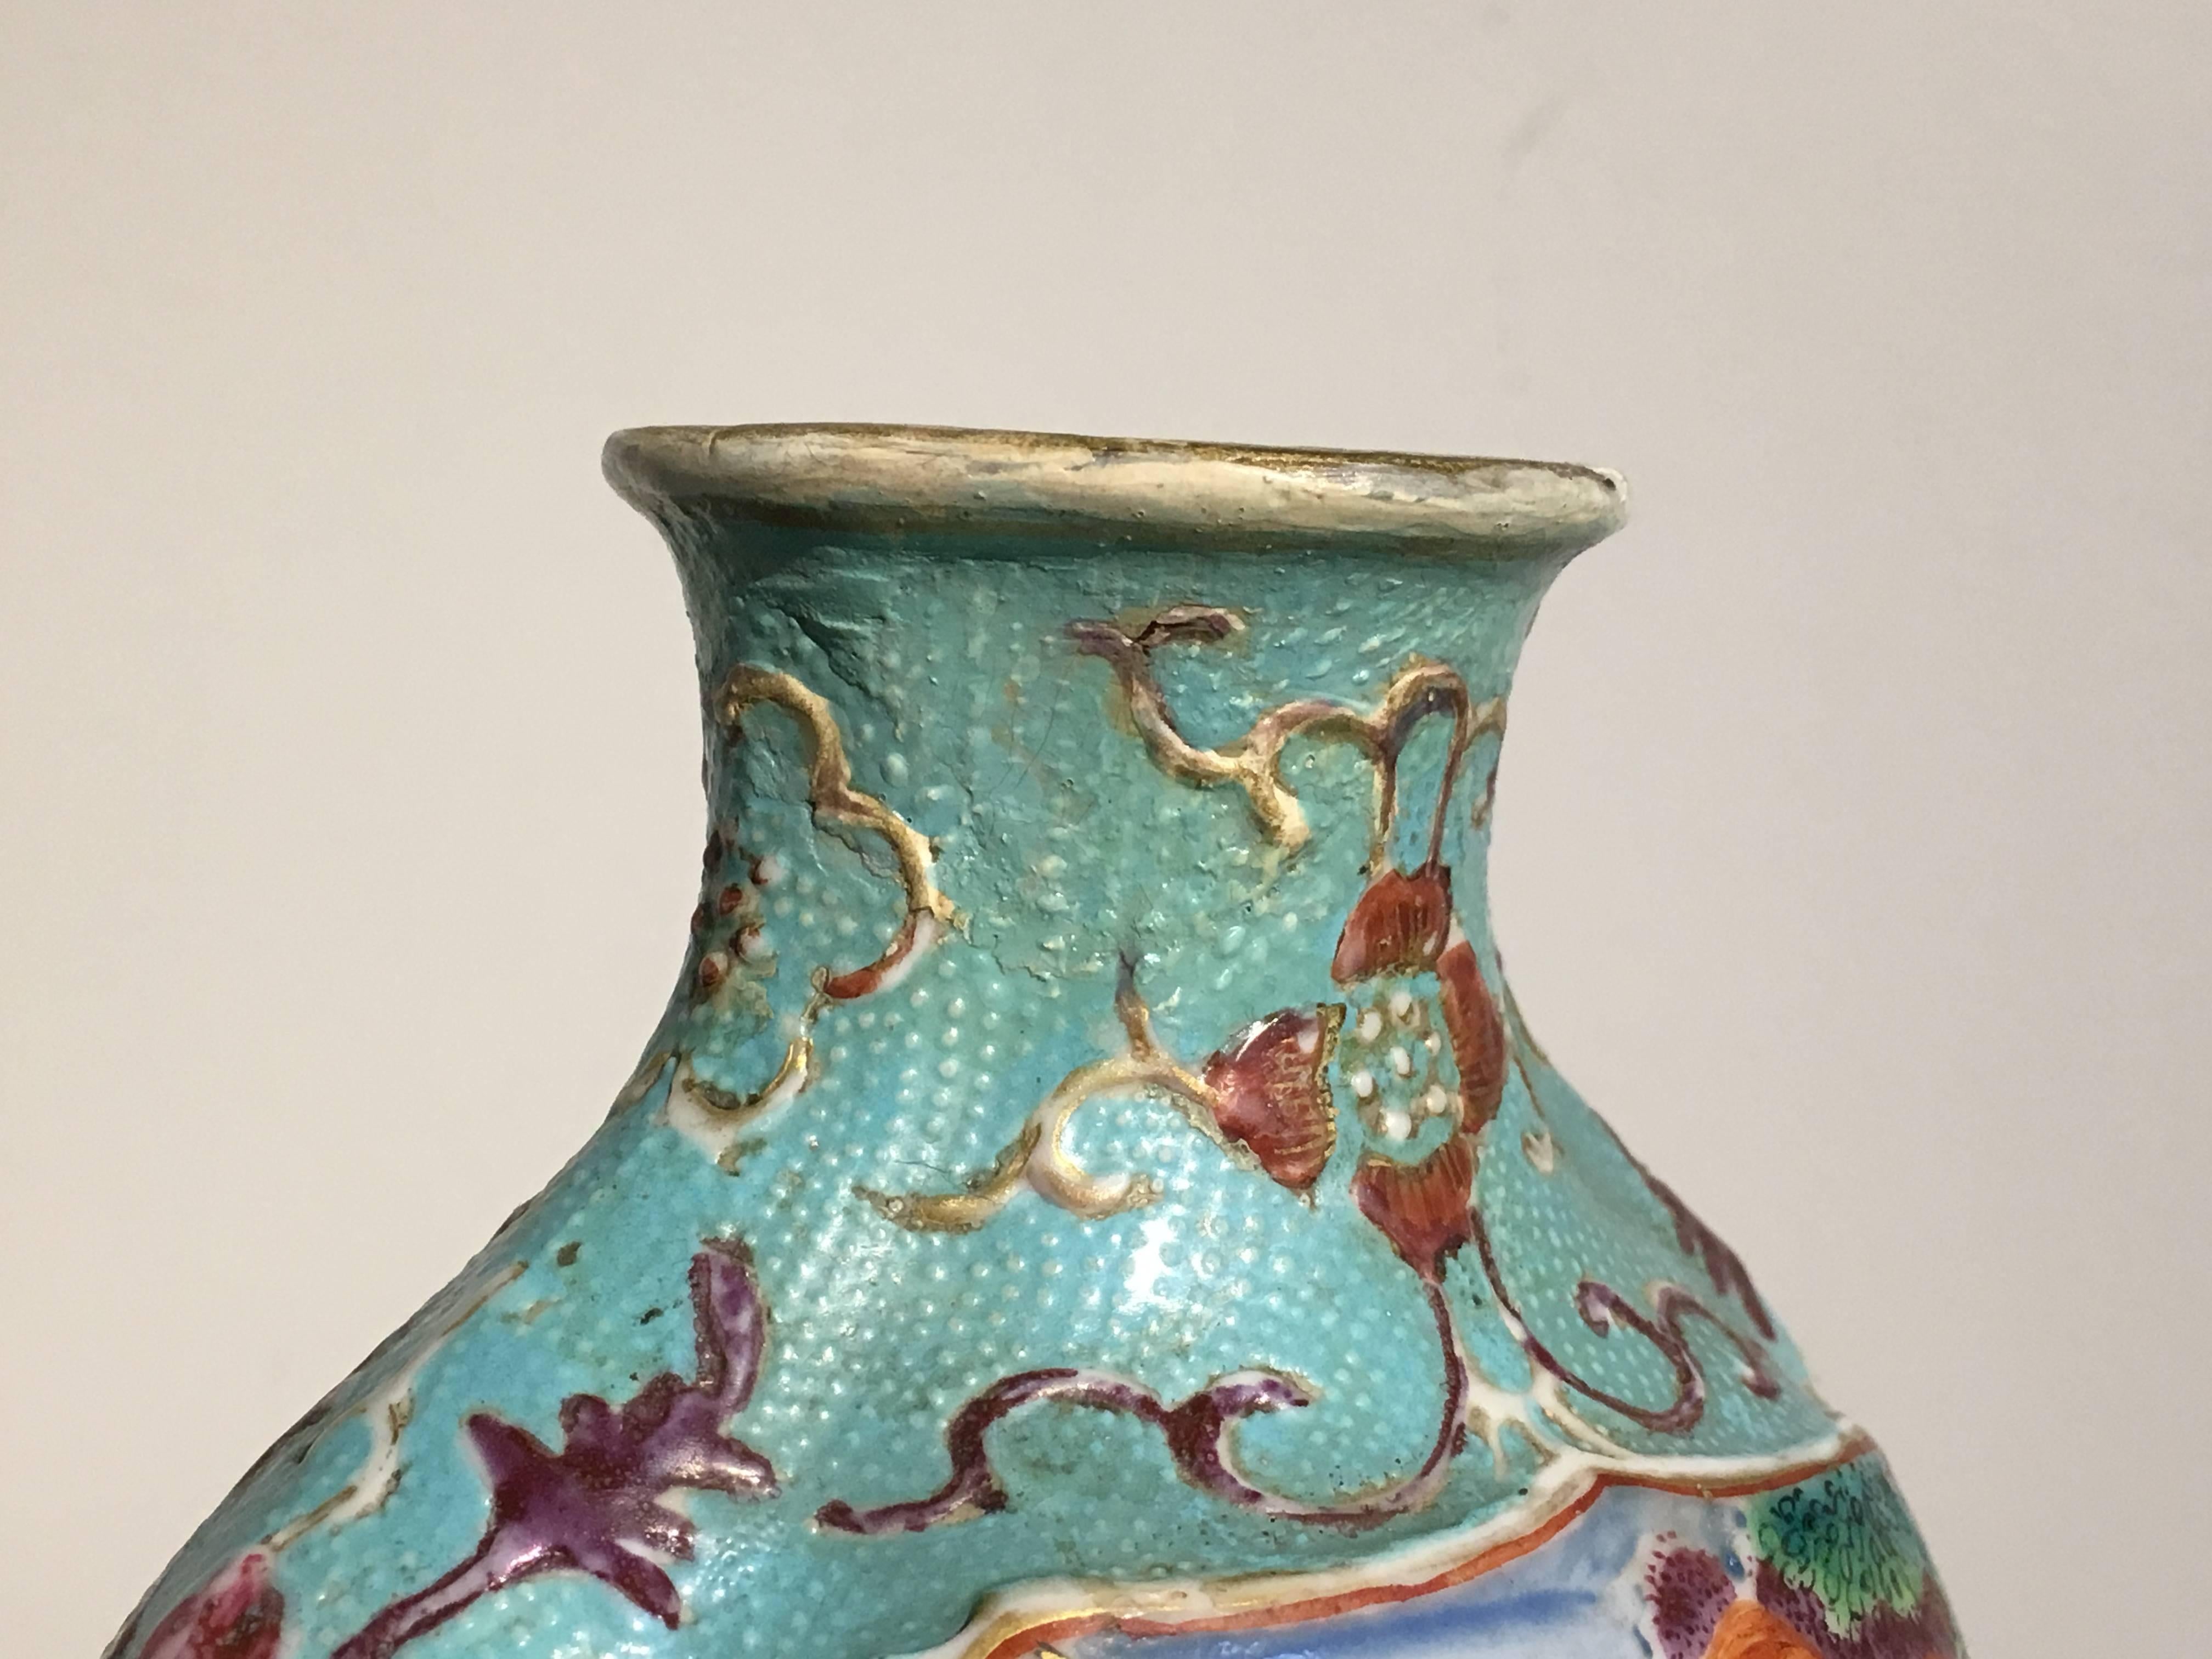 Porcelain Pair of Late 18th Century Chinese Export Mandarin Turquoise Vases